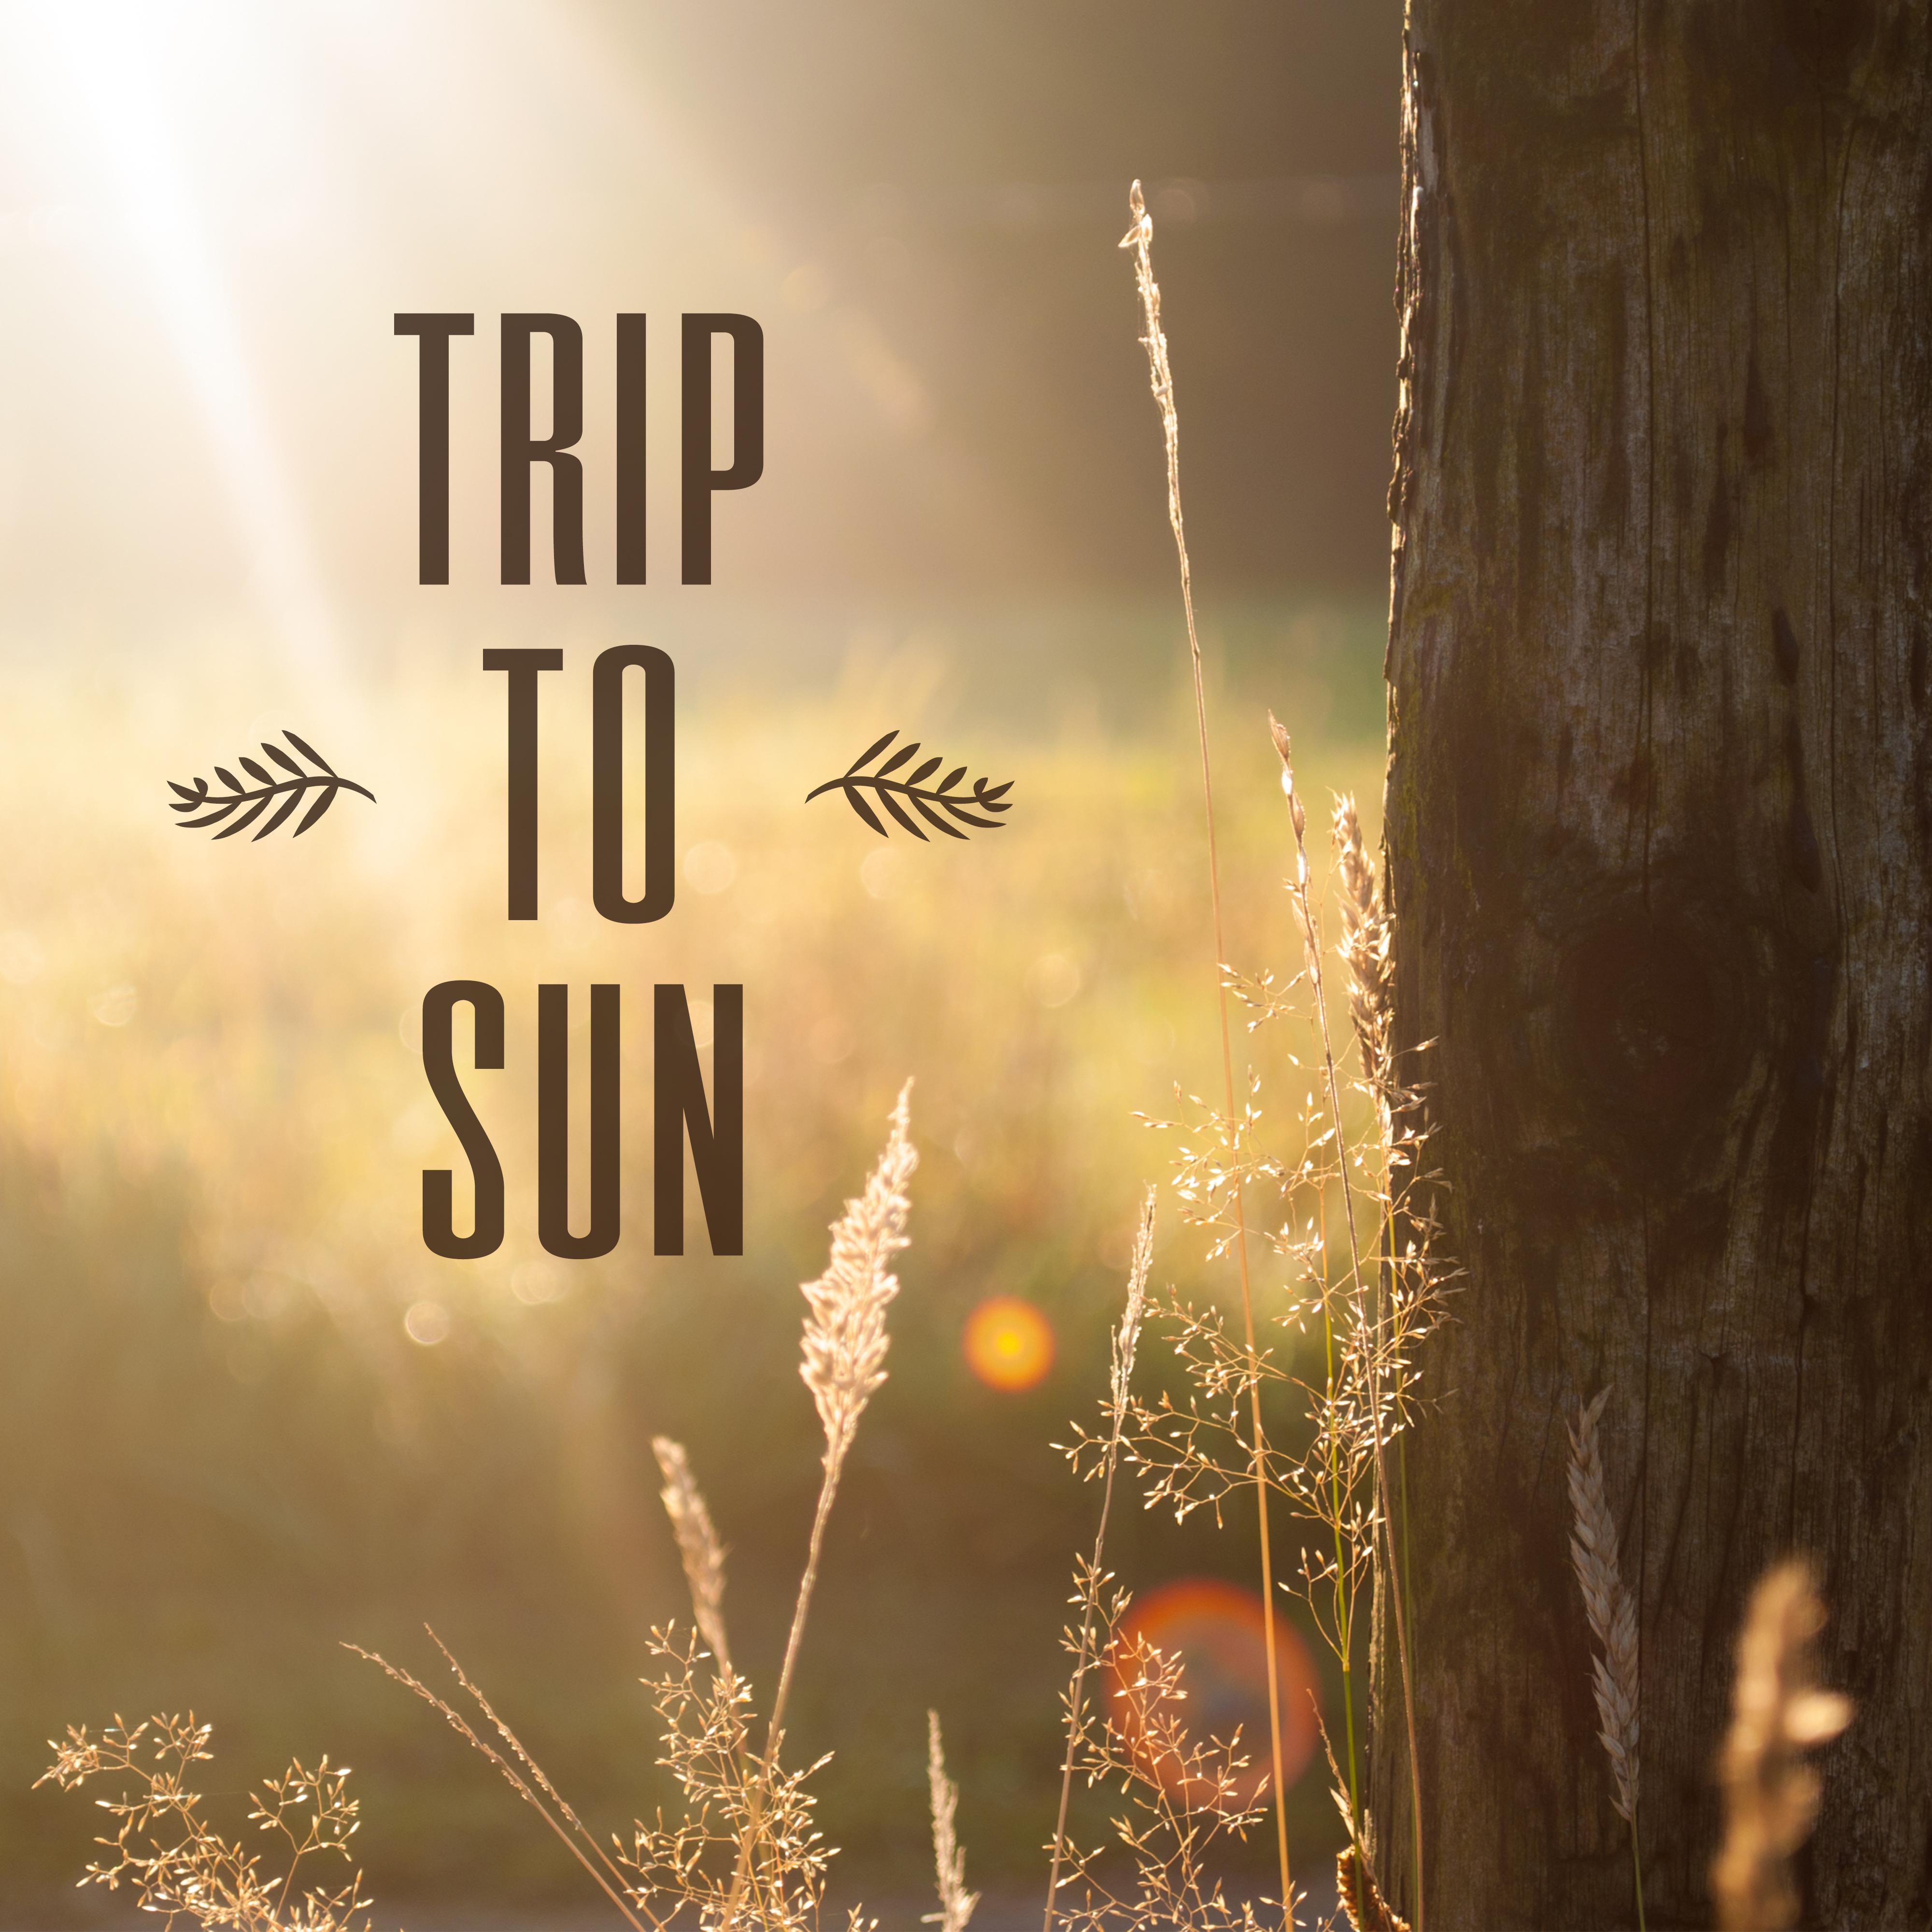 Trip to Sun – Best Holiday Chill Out Music, **** Vibes, Drinks Under Palms, Sea, Sand, Deep Sun, Beach Chill, Relaxation